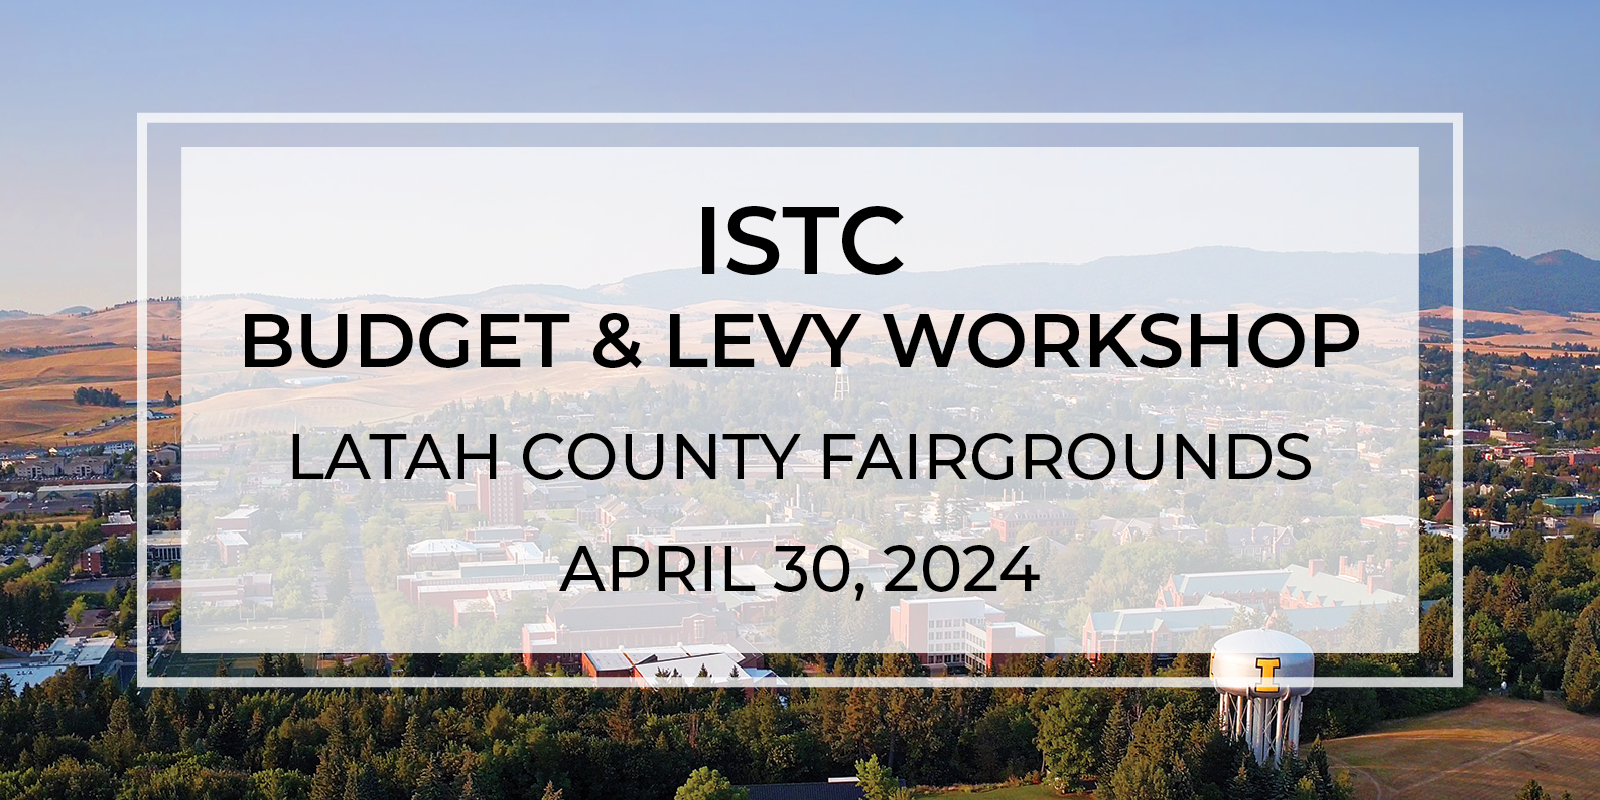 ISTC 2024 Budget and Levy Workshop: Moscow